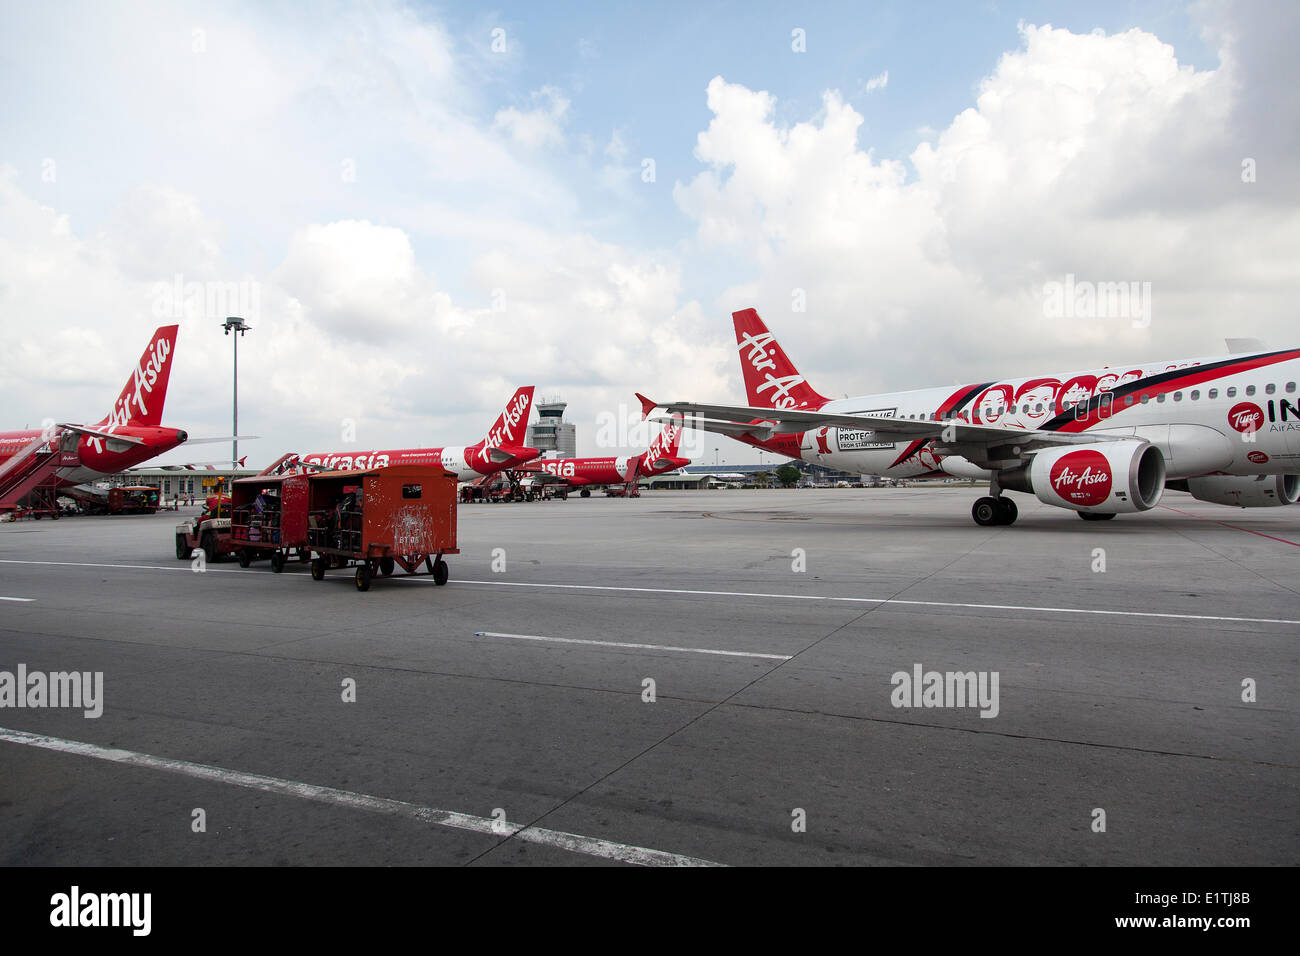 Air Asia planes at Kuala Lumpur International Airport LCCT, Malaysia, April 30, 2014. Air Asia is a Malaysian low-cost airline operating across the whole Asia. (CTK Photo/Karel Picha) Stock Photo